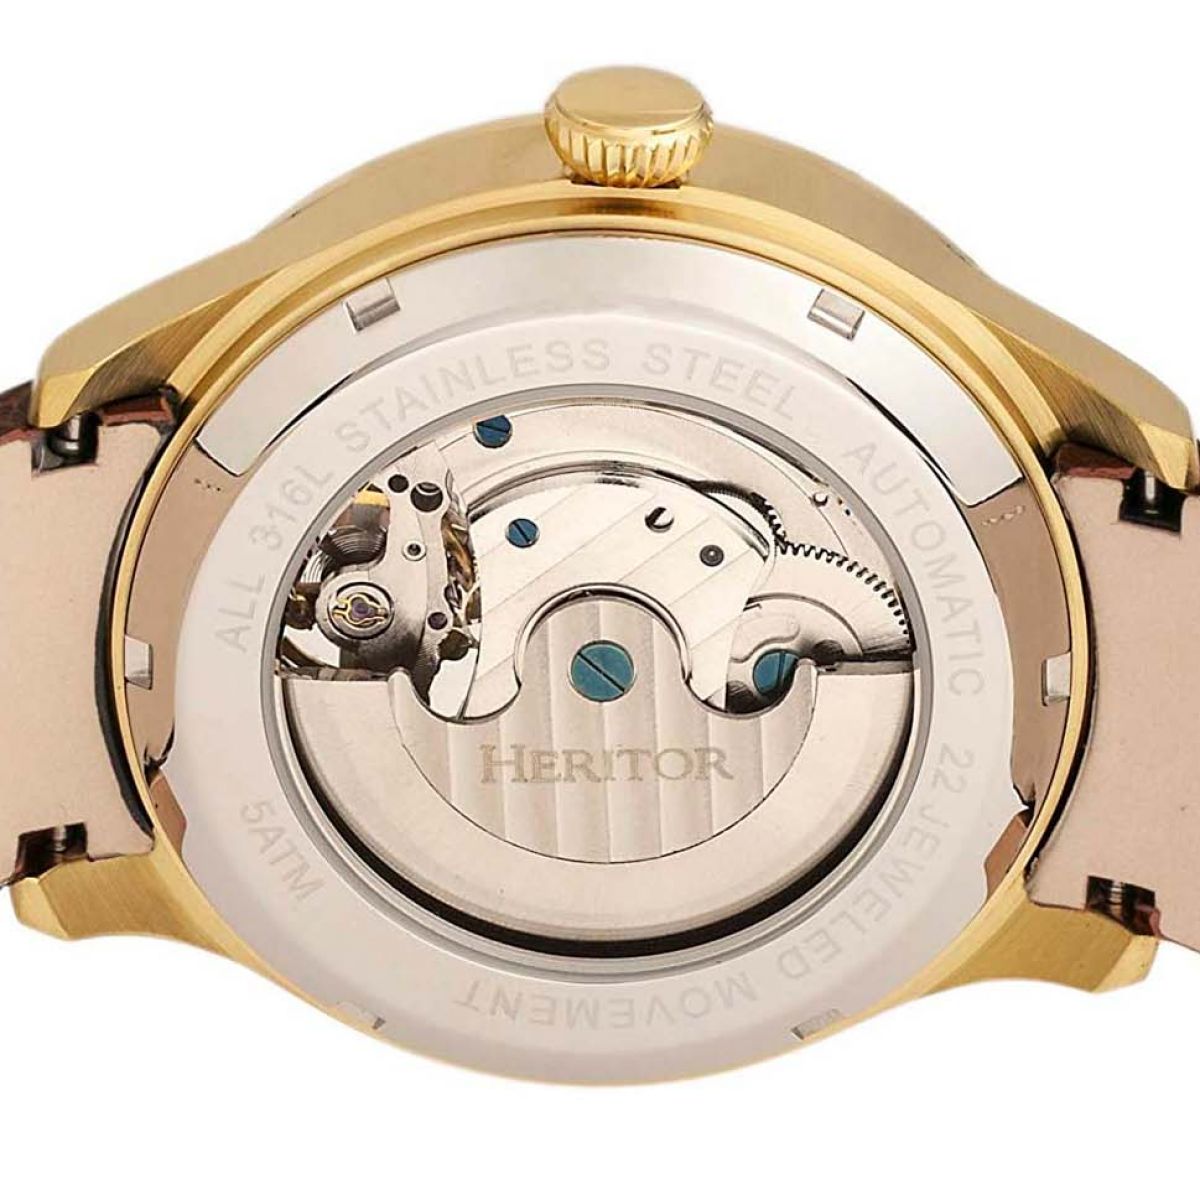 Heritor Gregory Open Heart Automatic | HERHR8103